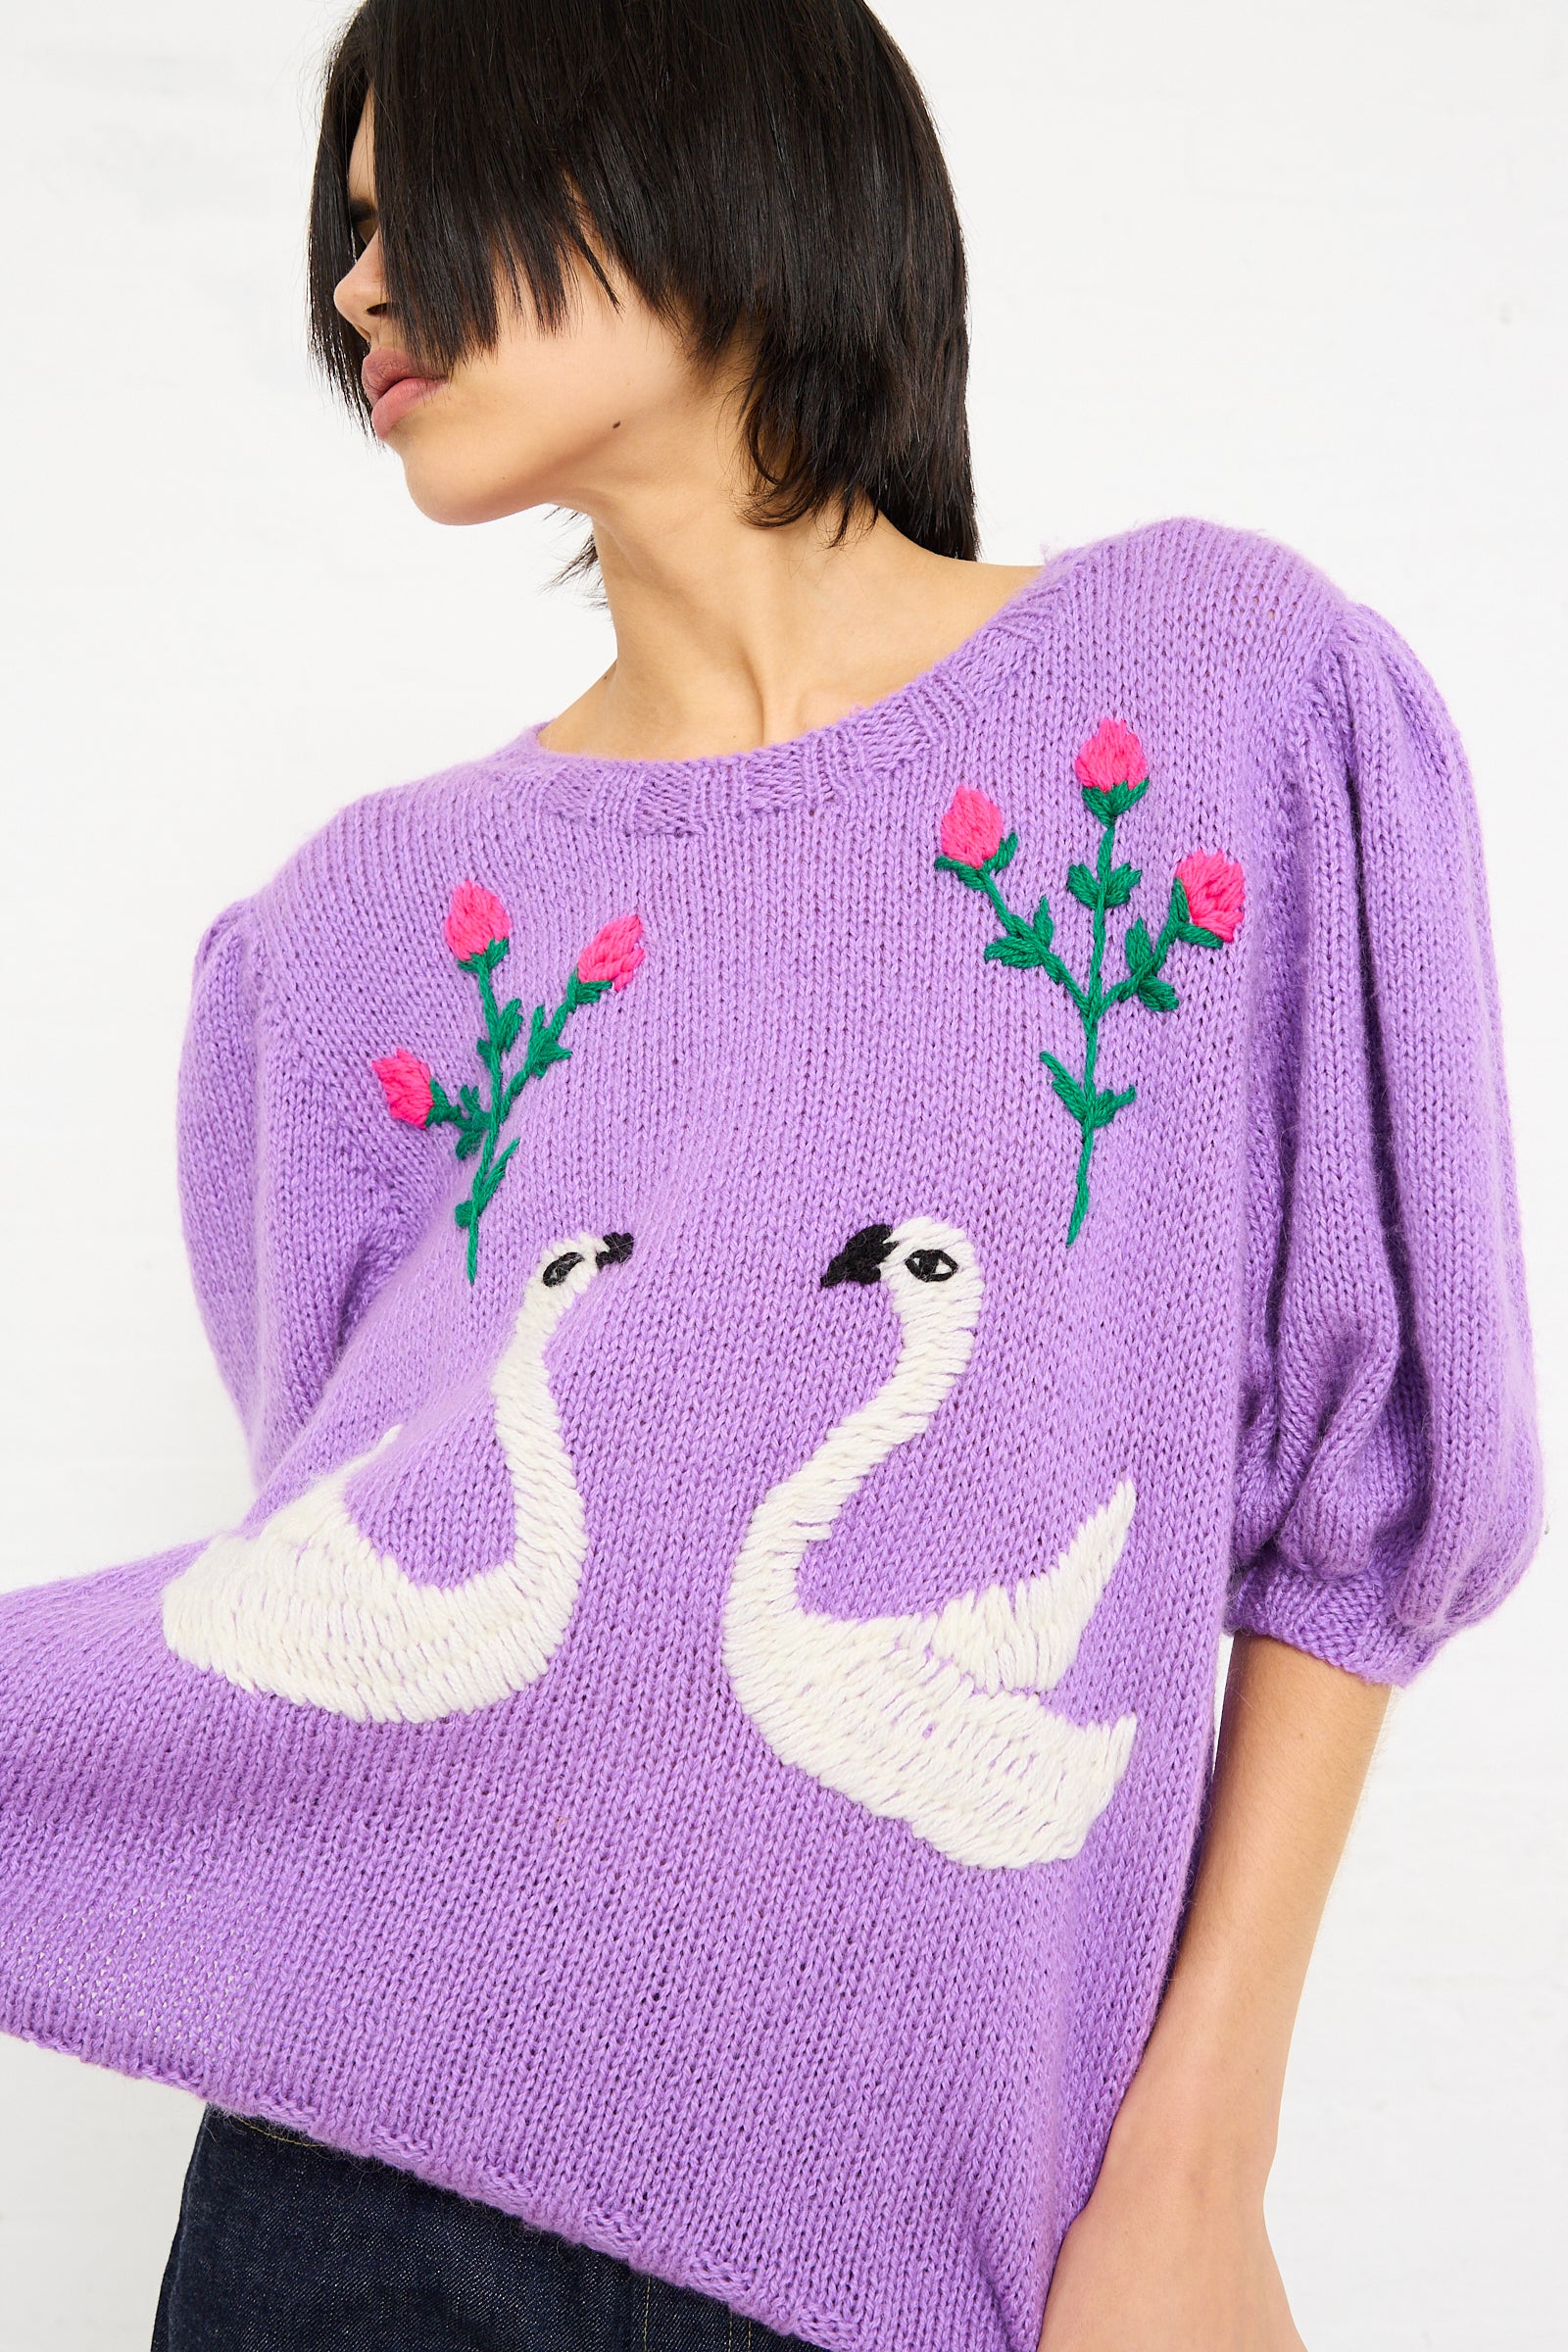 Woman in a Sofio Gongli hand-knit sweater with embroidered swans and flowers, profile view, against a white background.